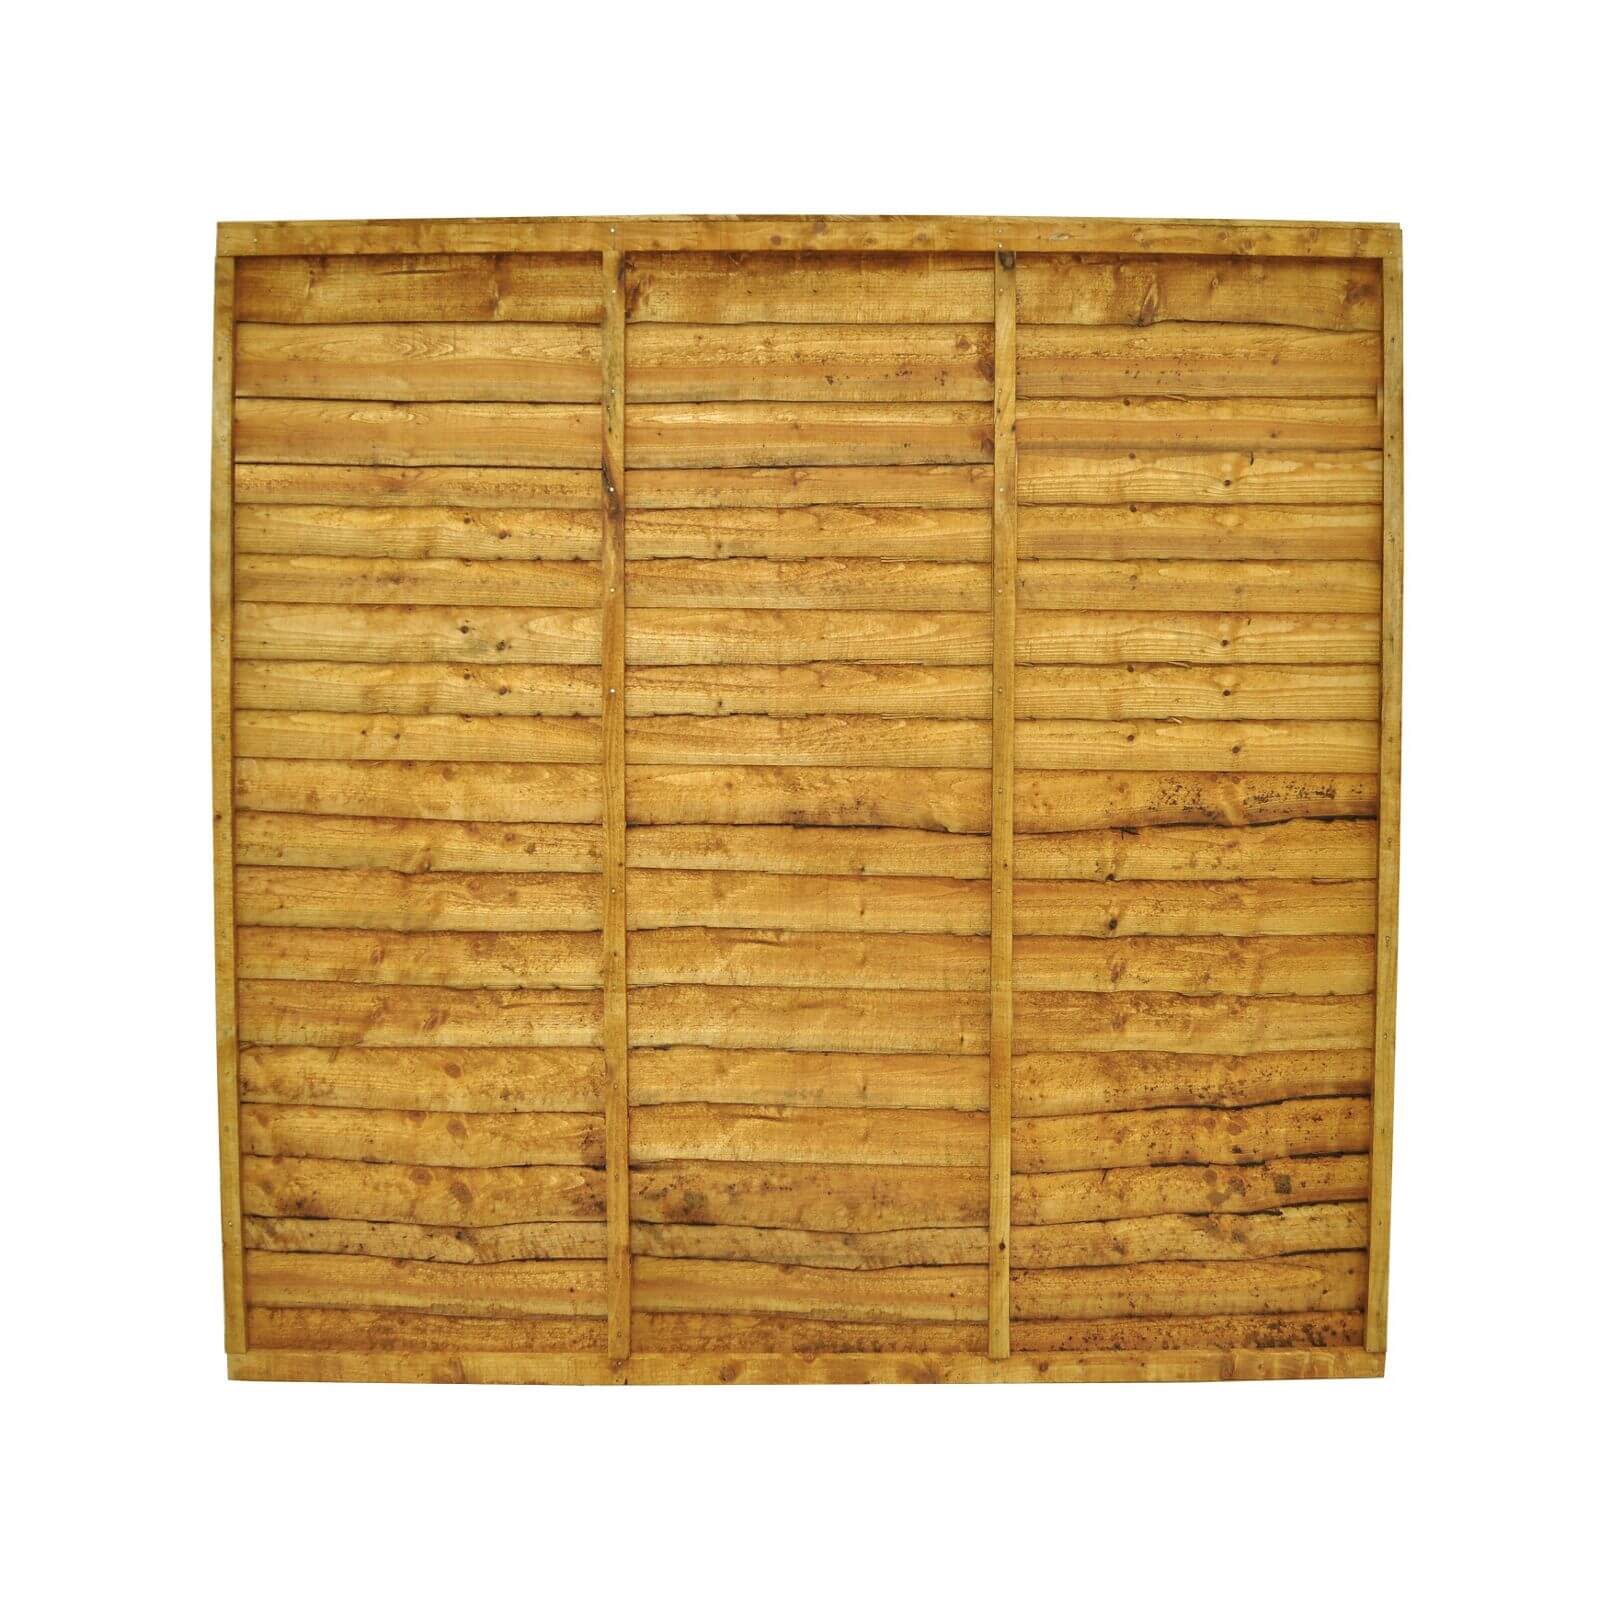 Forest Lap Fence Panel - 6x6ft